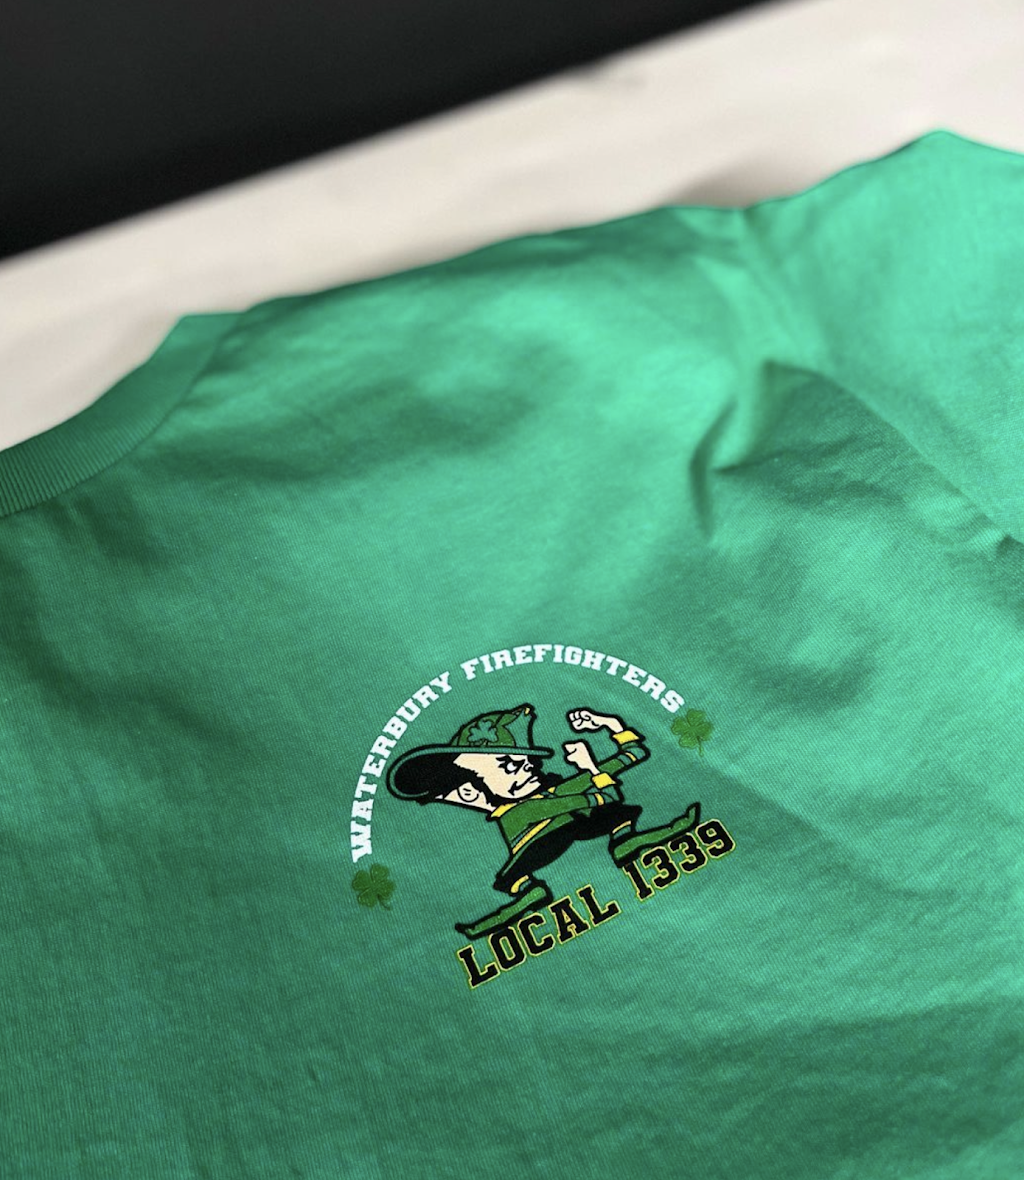 Brass City Ink Screen Printing & Embroidery | Lower Level, 1760 Watertown Ave, Oakville, CT 06779 | Phone: (203) 493-0919